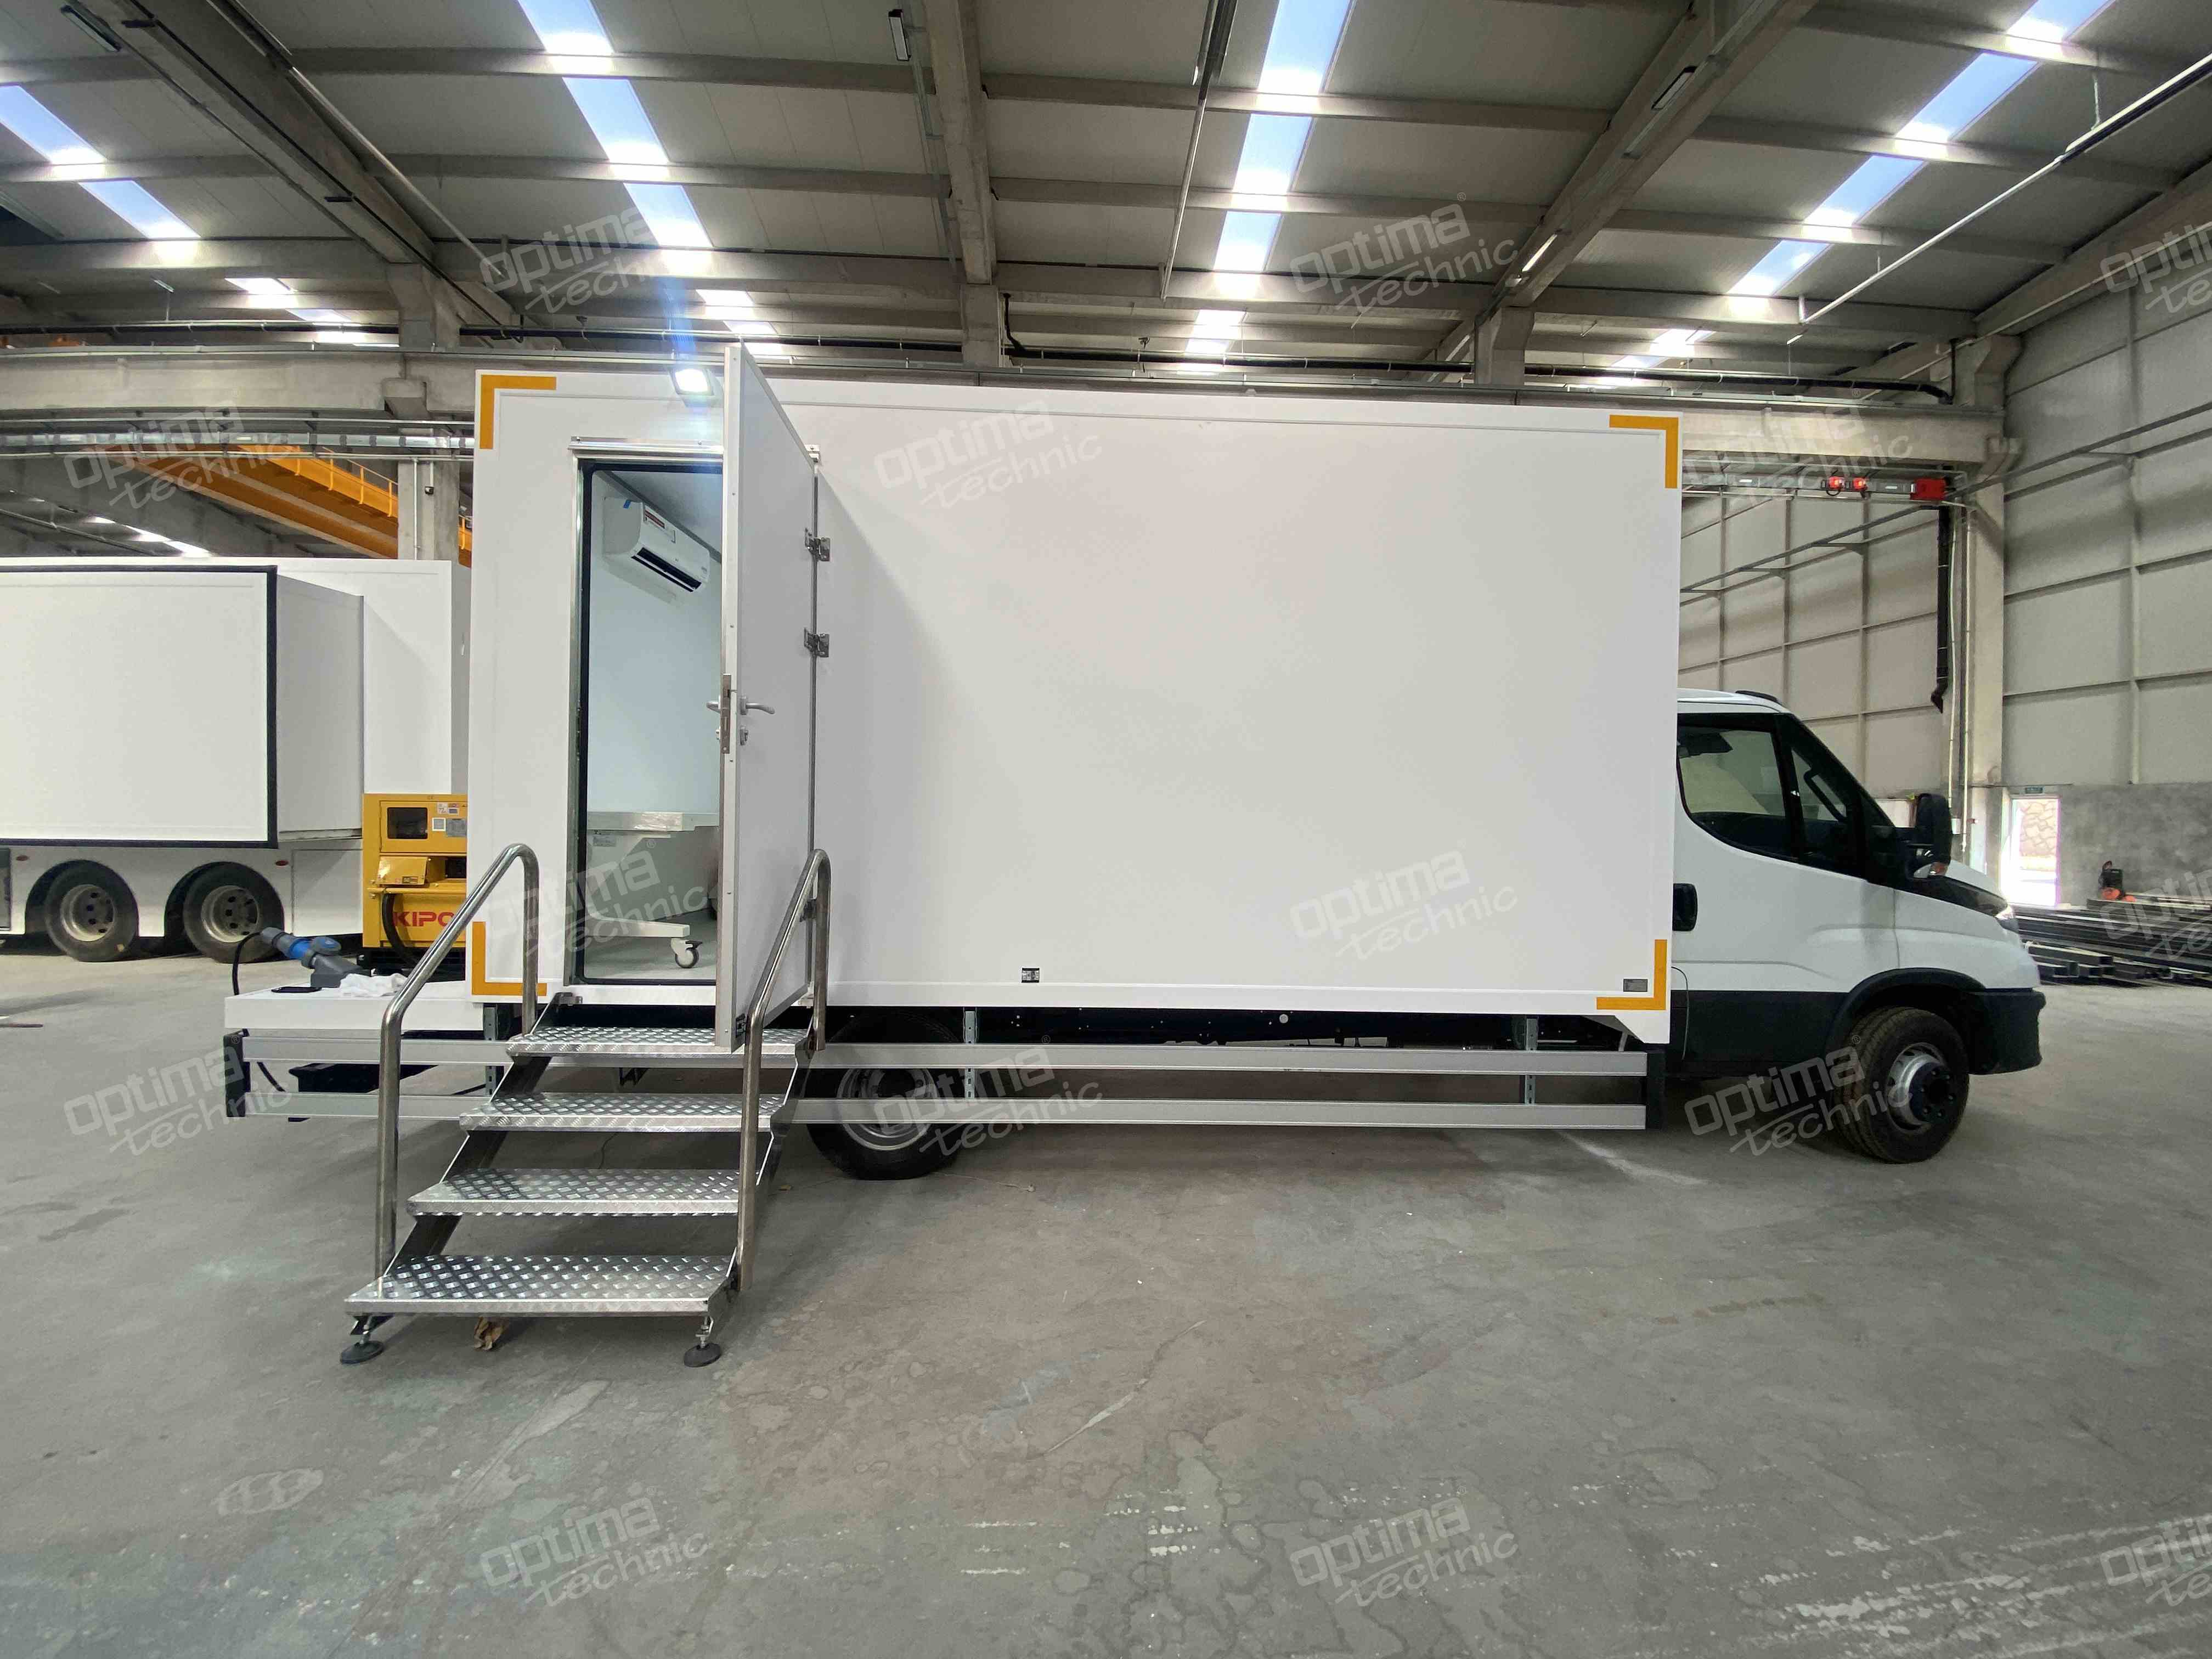 Mobile X-Ray Truck